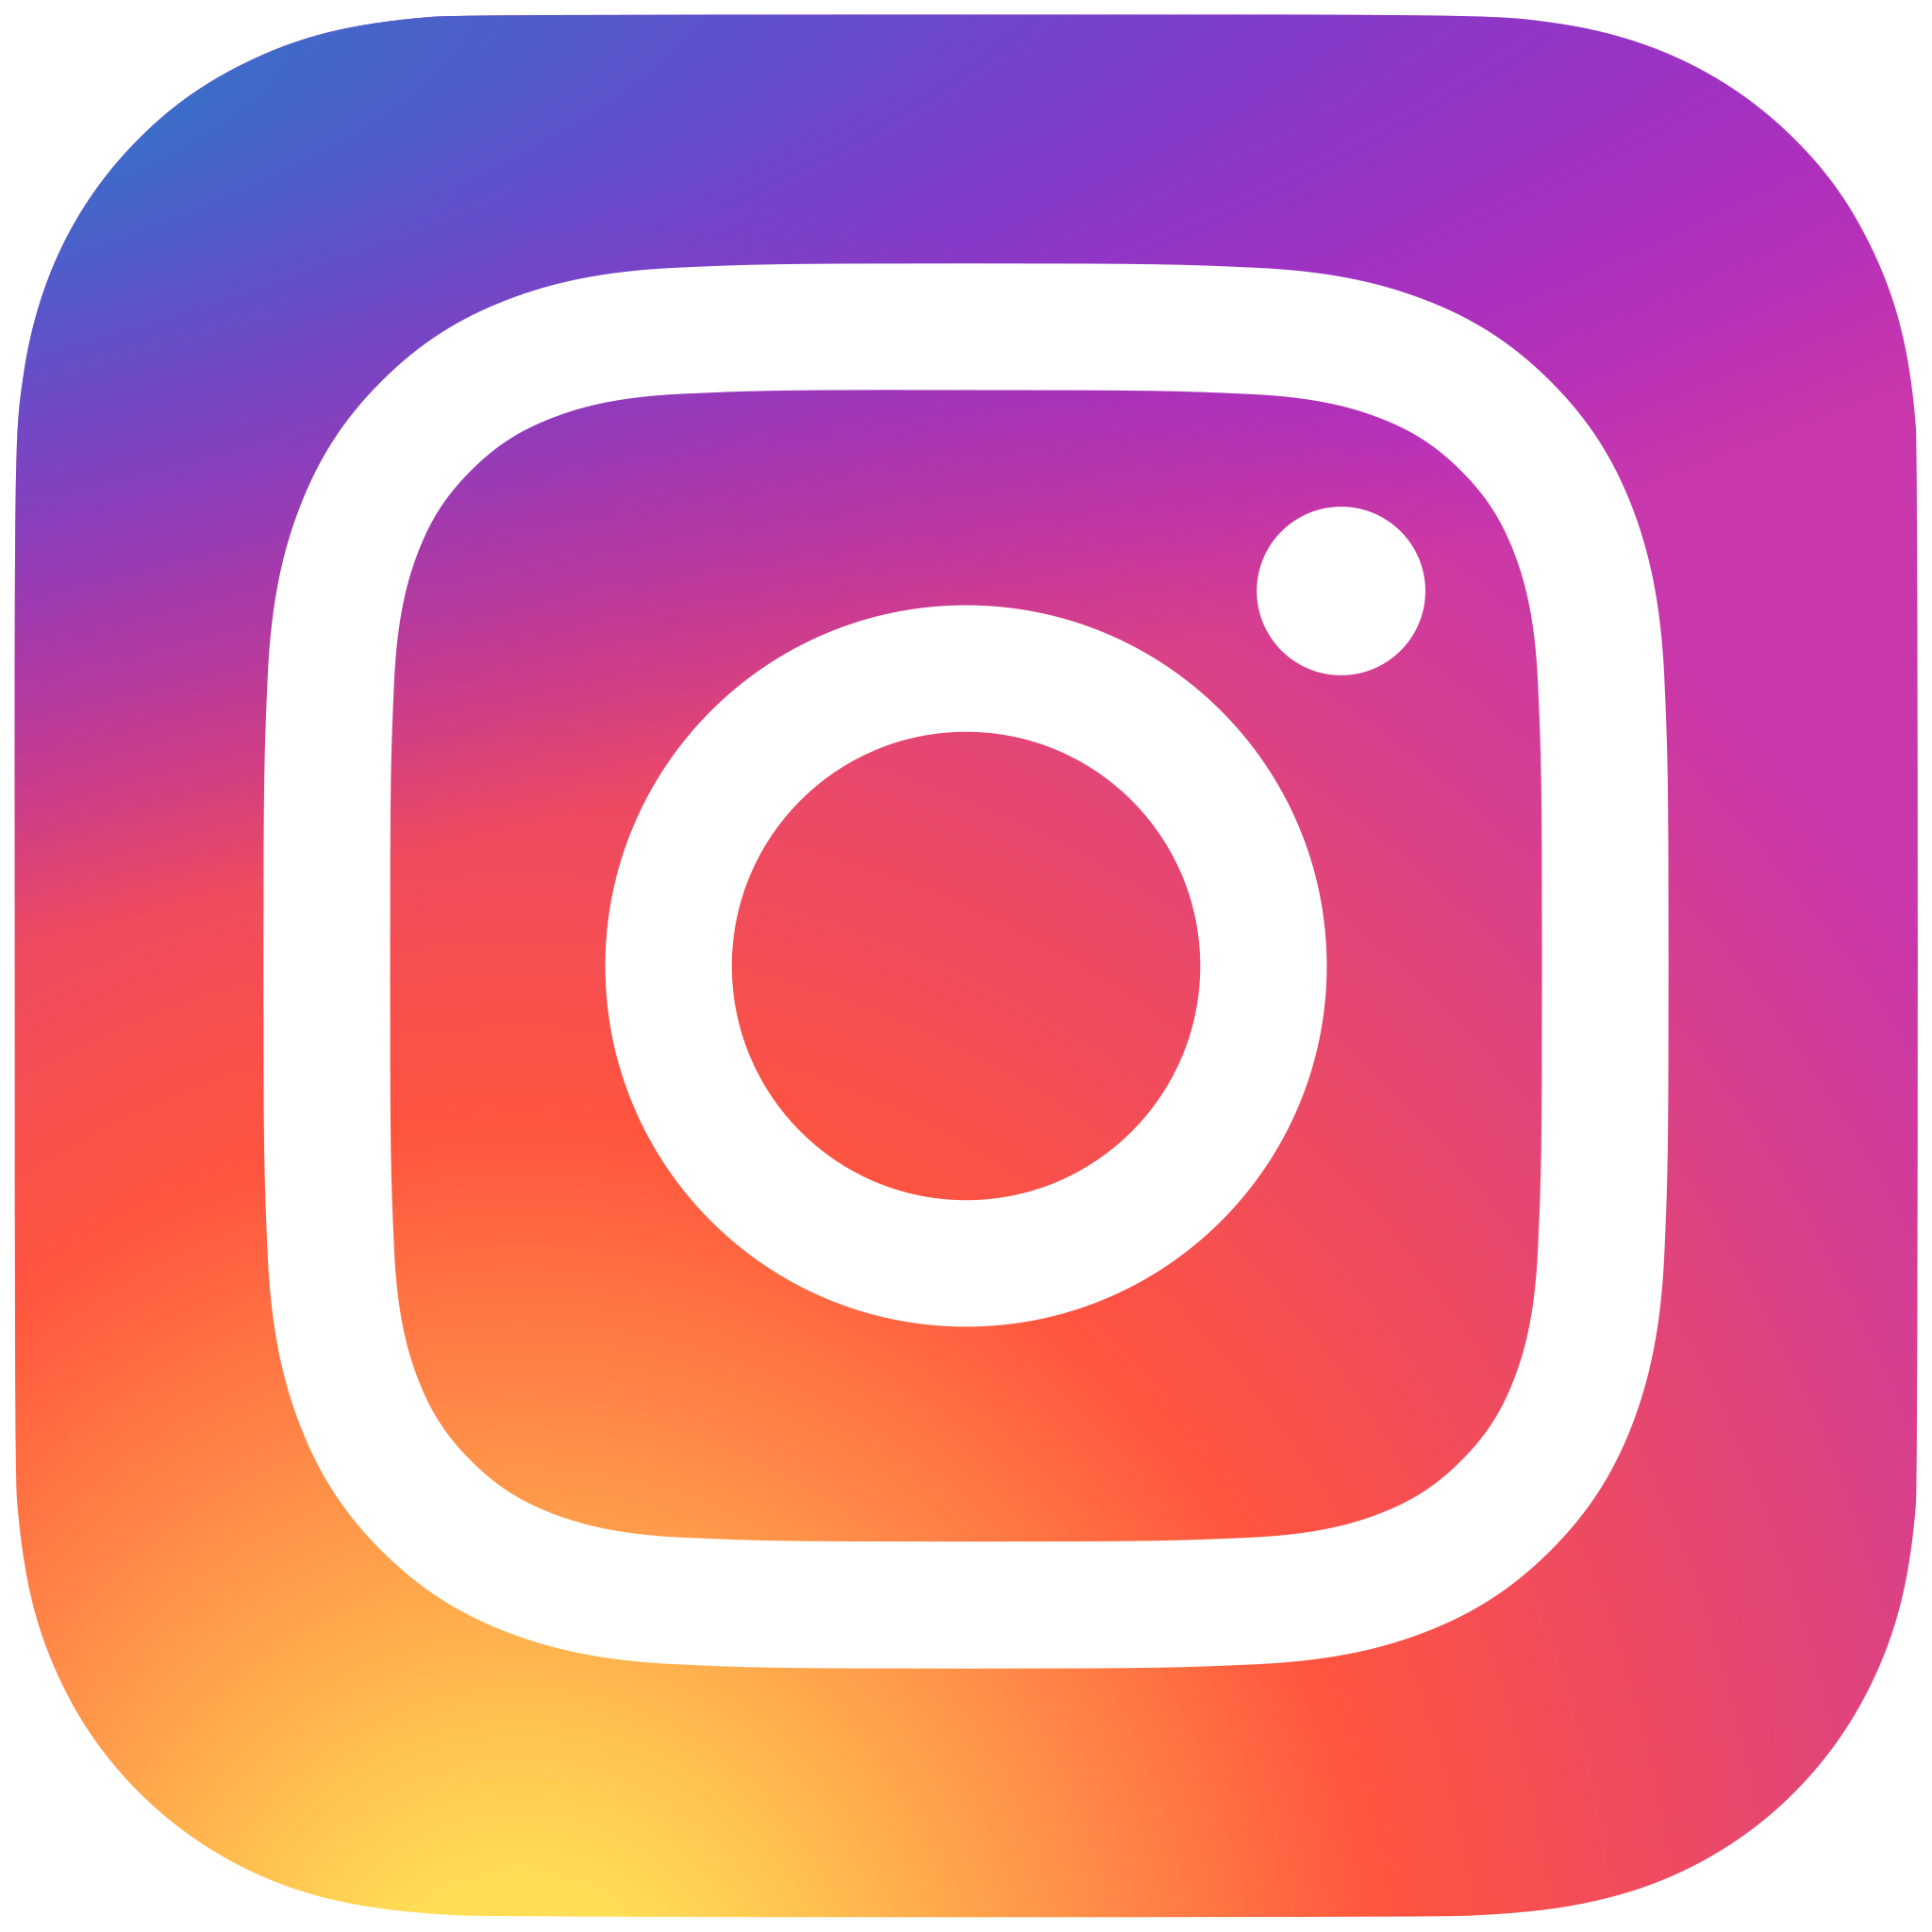 The Instagram logo of a camera stylized, with a gradient going from gold to purple